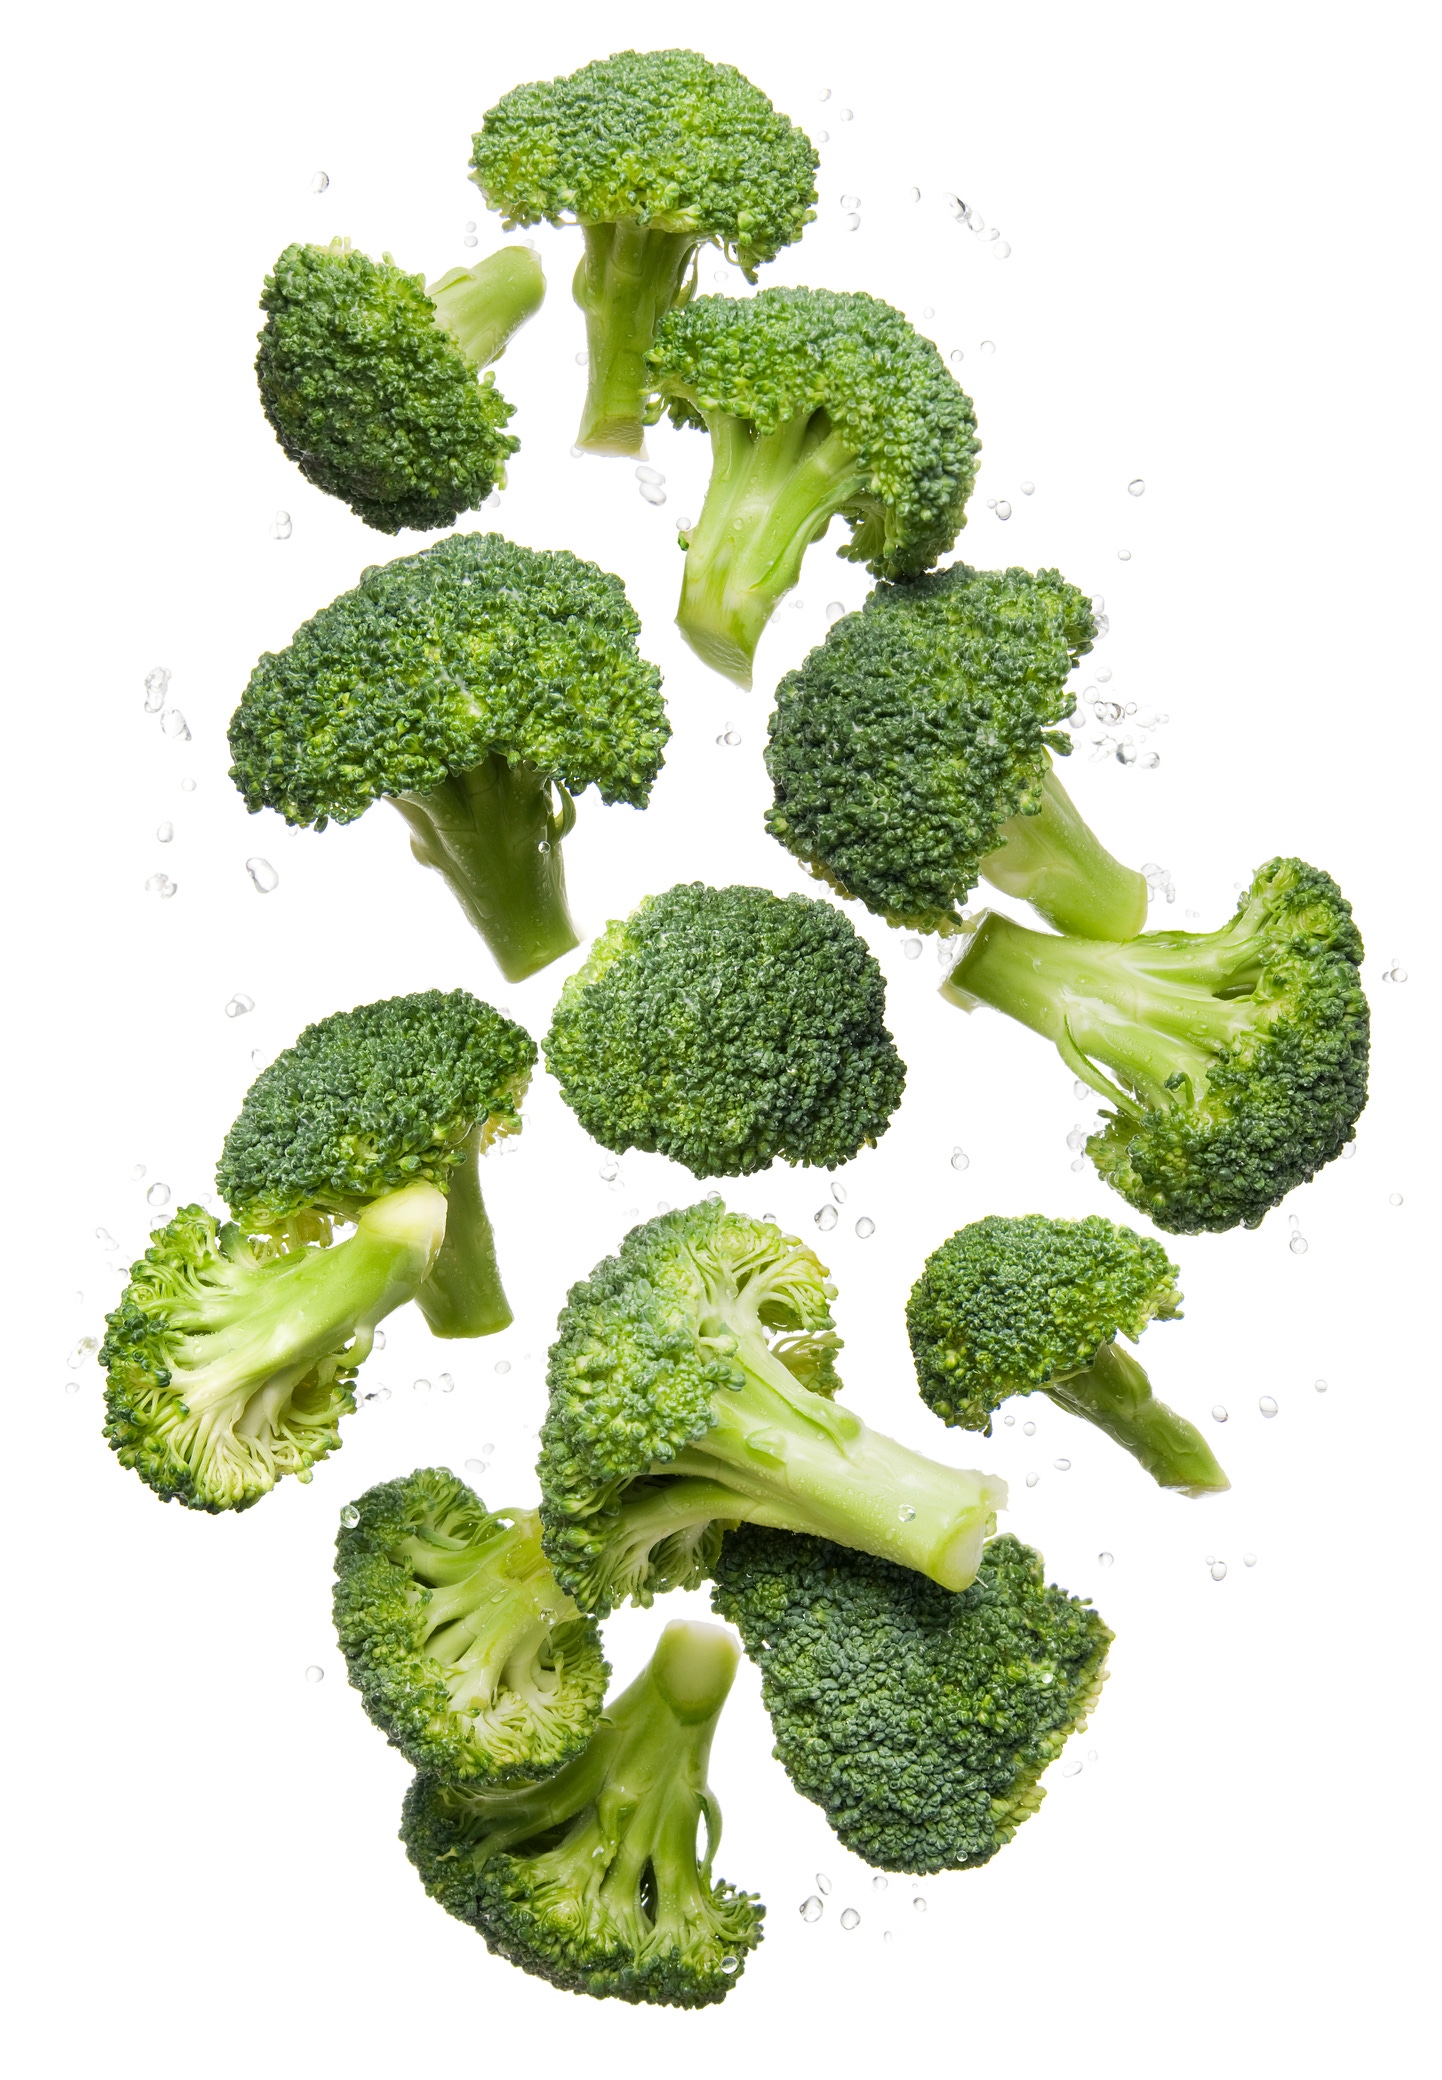 1/2 cup cooked broccoli